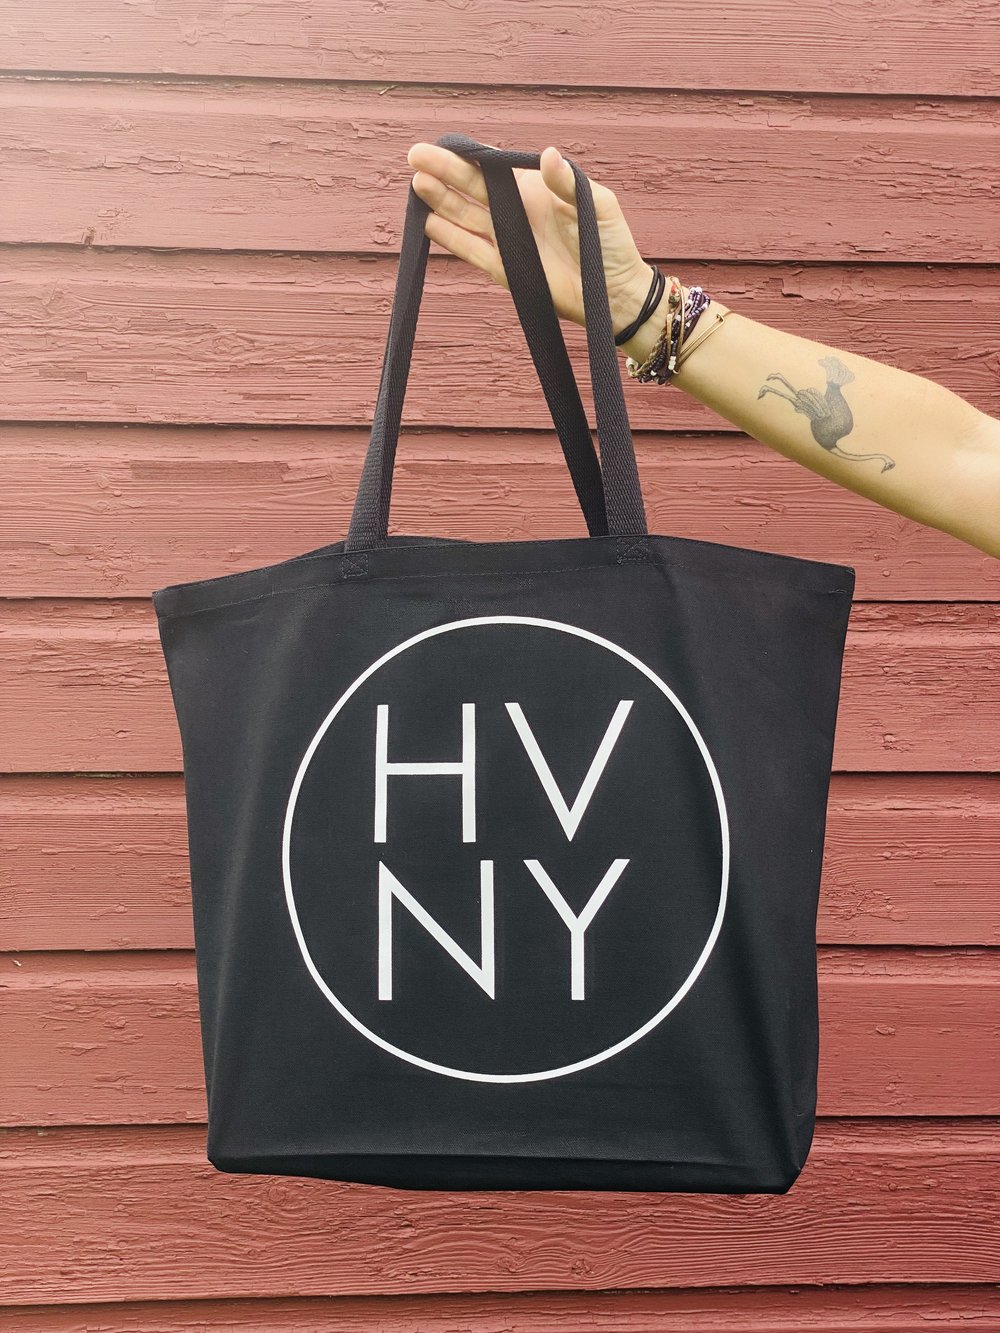 Tote Bags for sale in Owyhee, Idaho, Facebook Marketplace